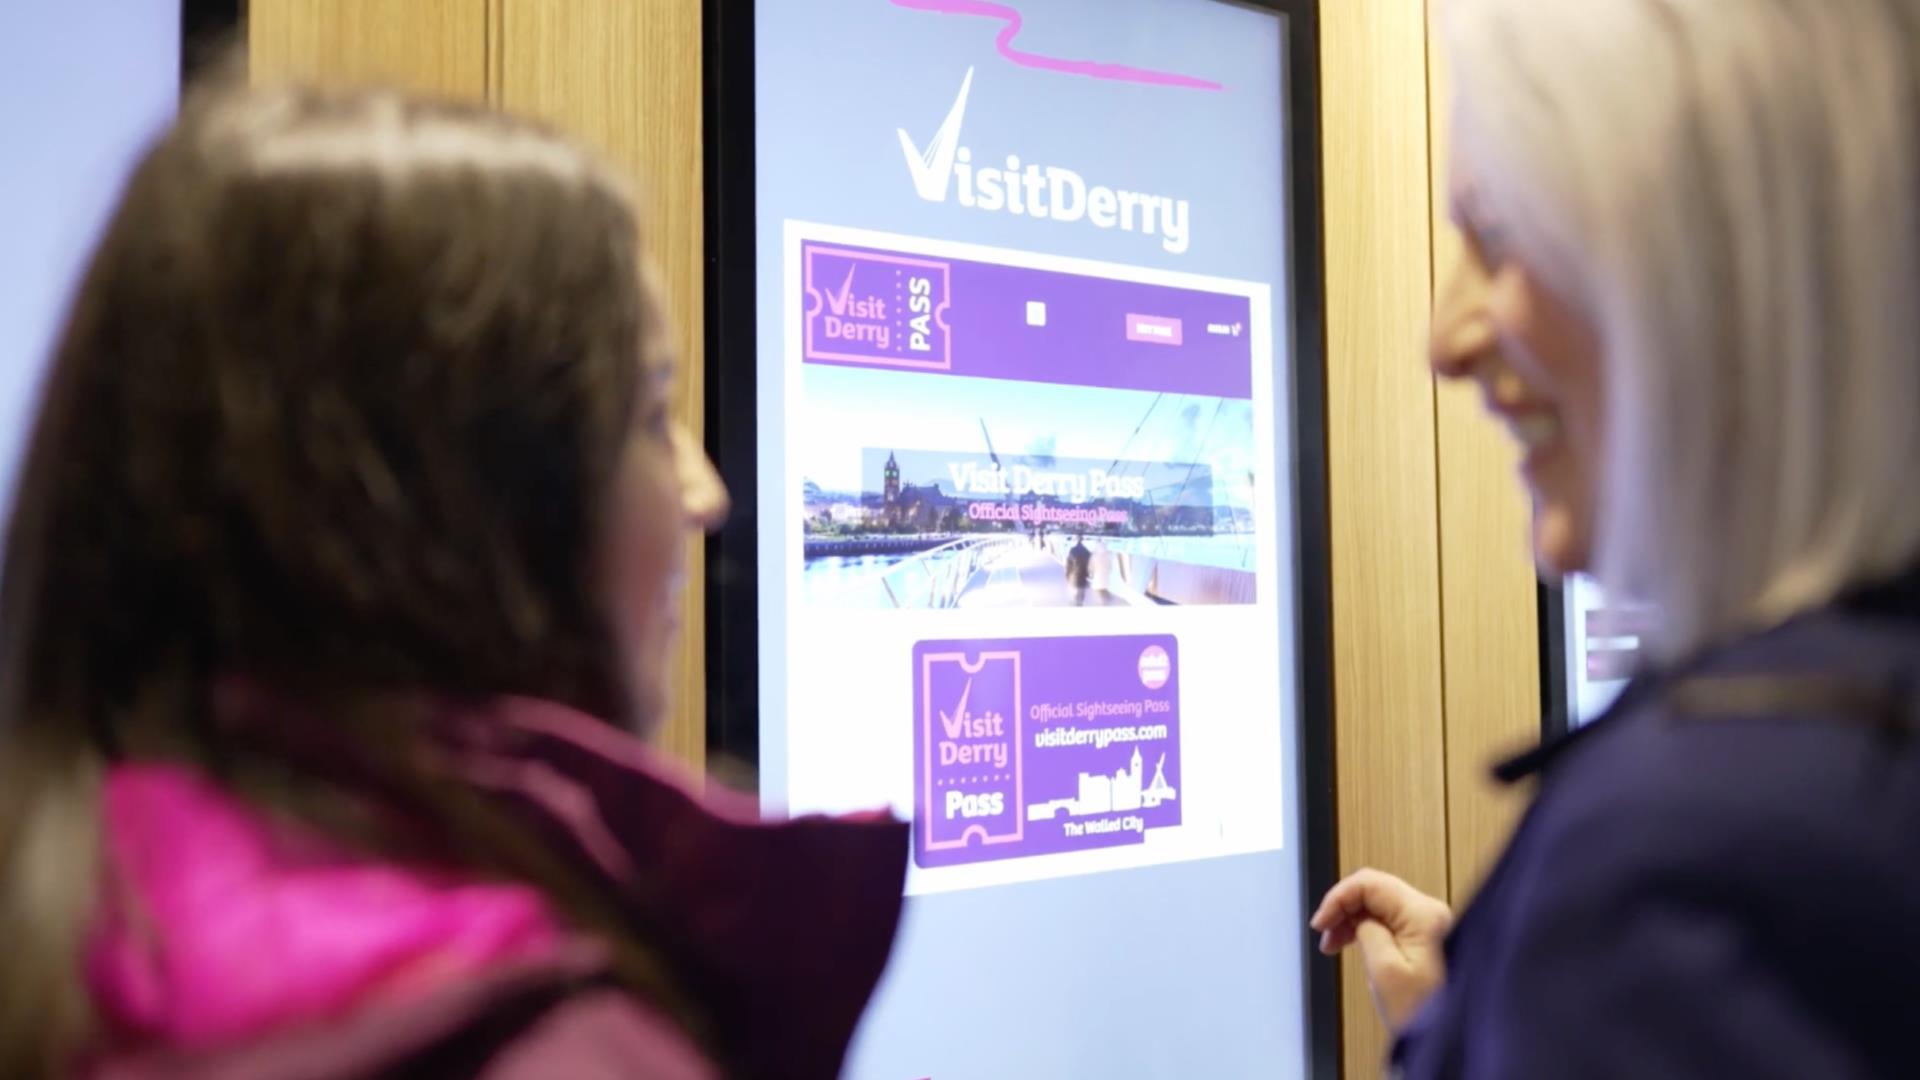 This  is an image of a mother and daughter buying the new sightseeing pass for Visit Derry in the Visit Derry Visitor Information Centre.